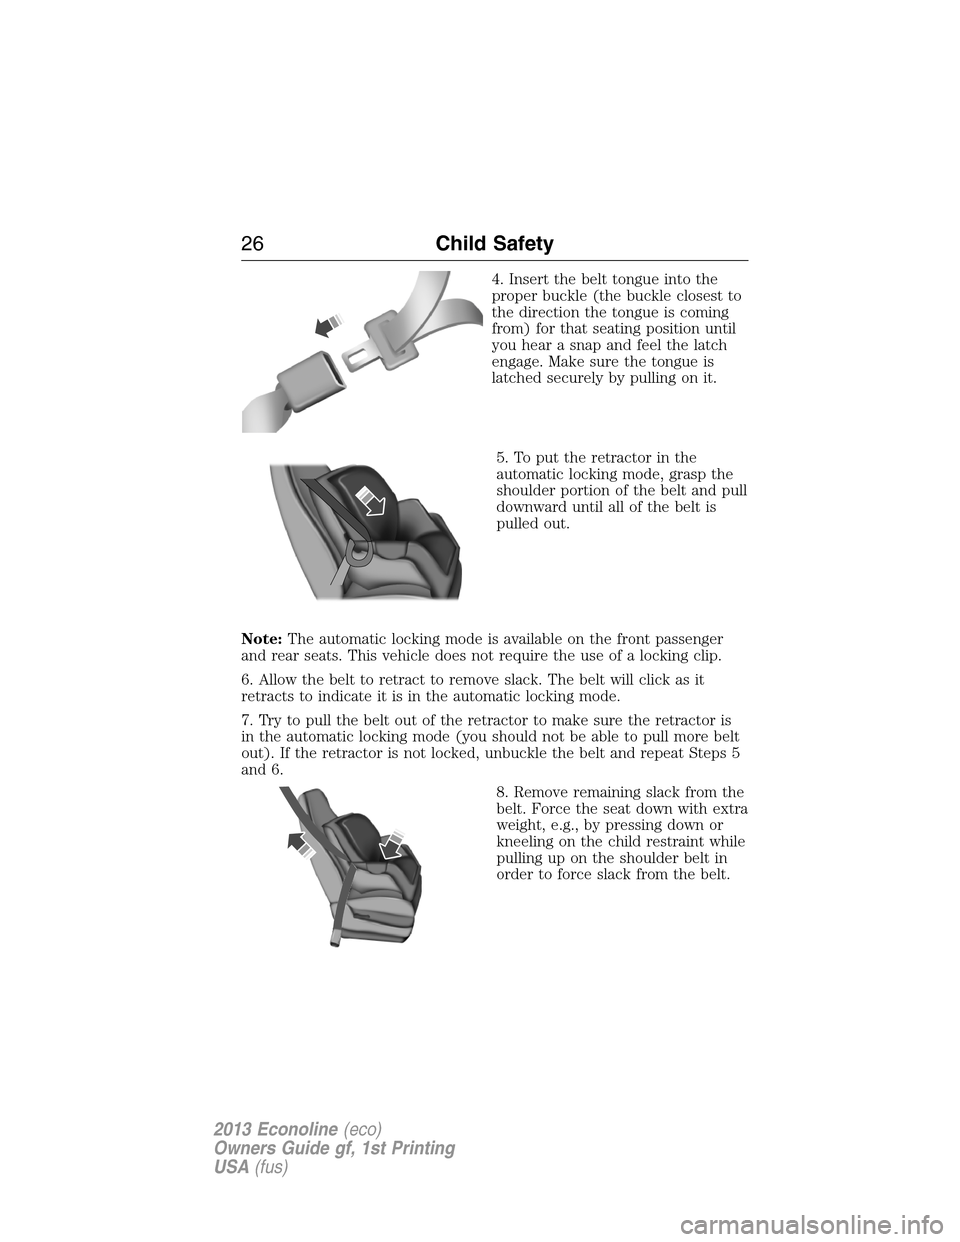 FORD E SERIES 2013 4.G Owners Manual 4. Insert the belt tongue into the
proper buckle (the buckle closest to
the direction the tongue is coming
from) for that seating position until
you hear a snap and feel the latch
engage. Make sure th